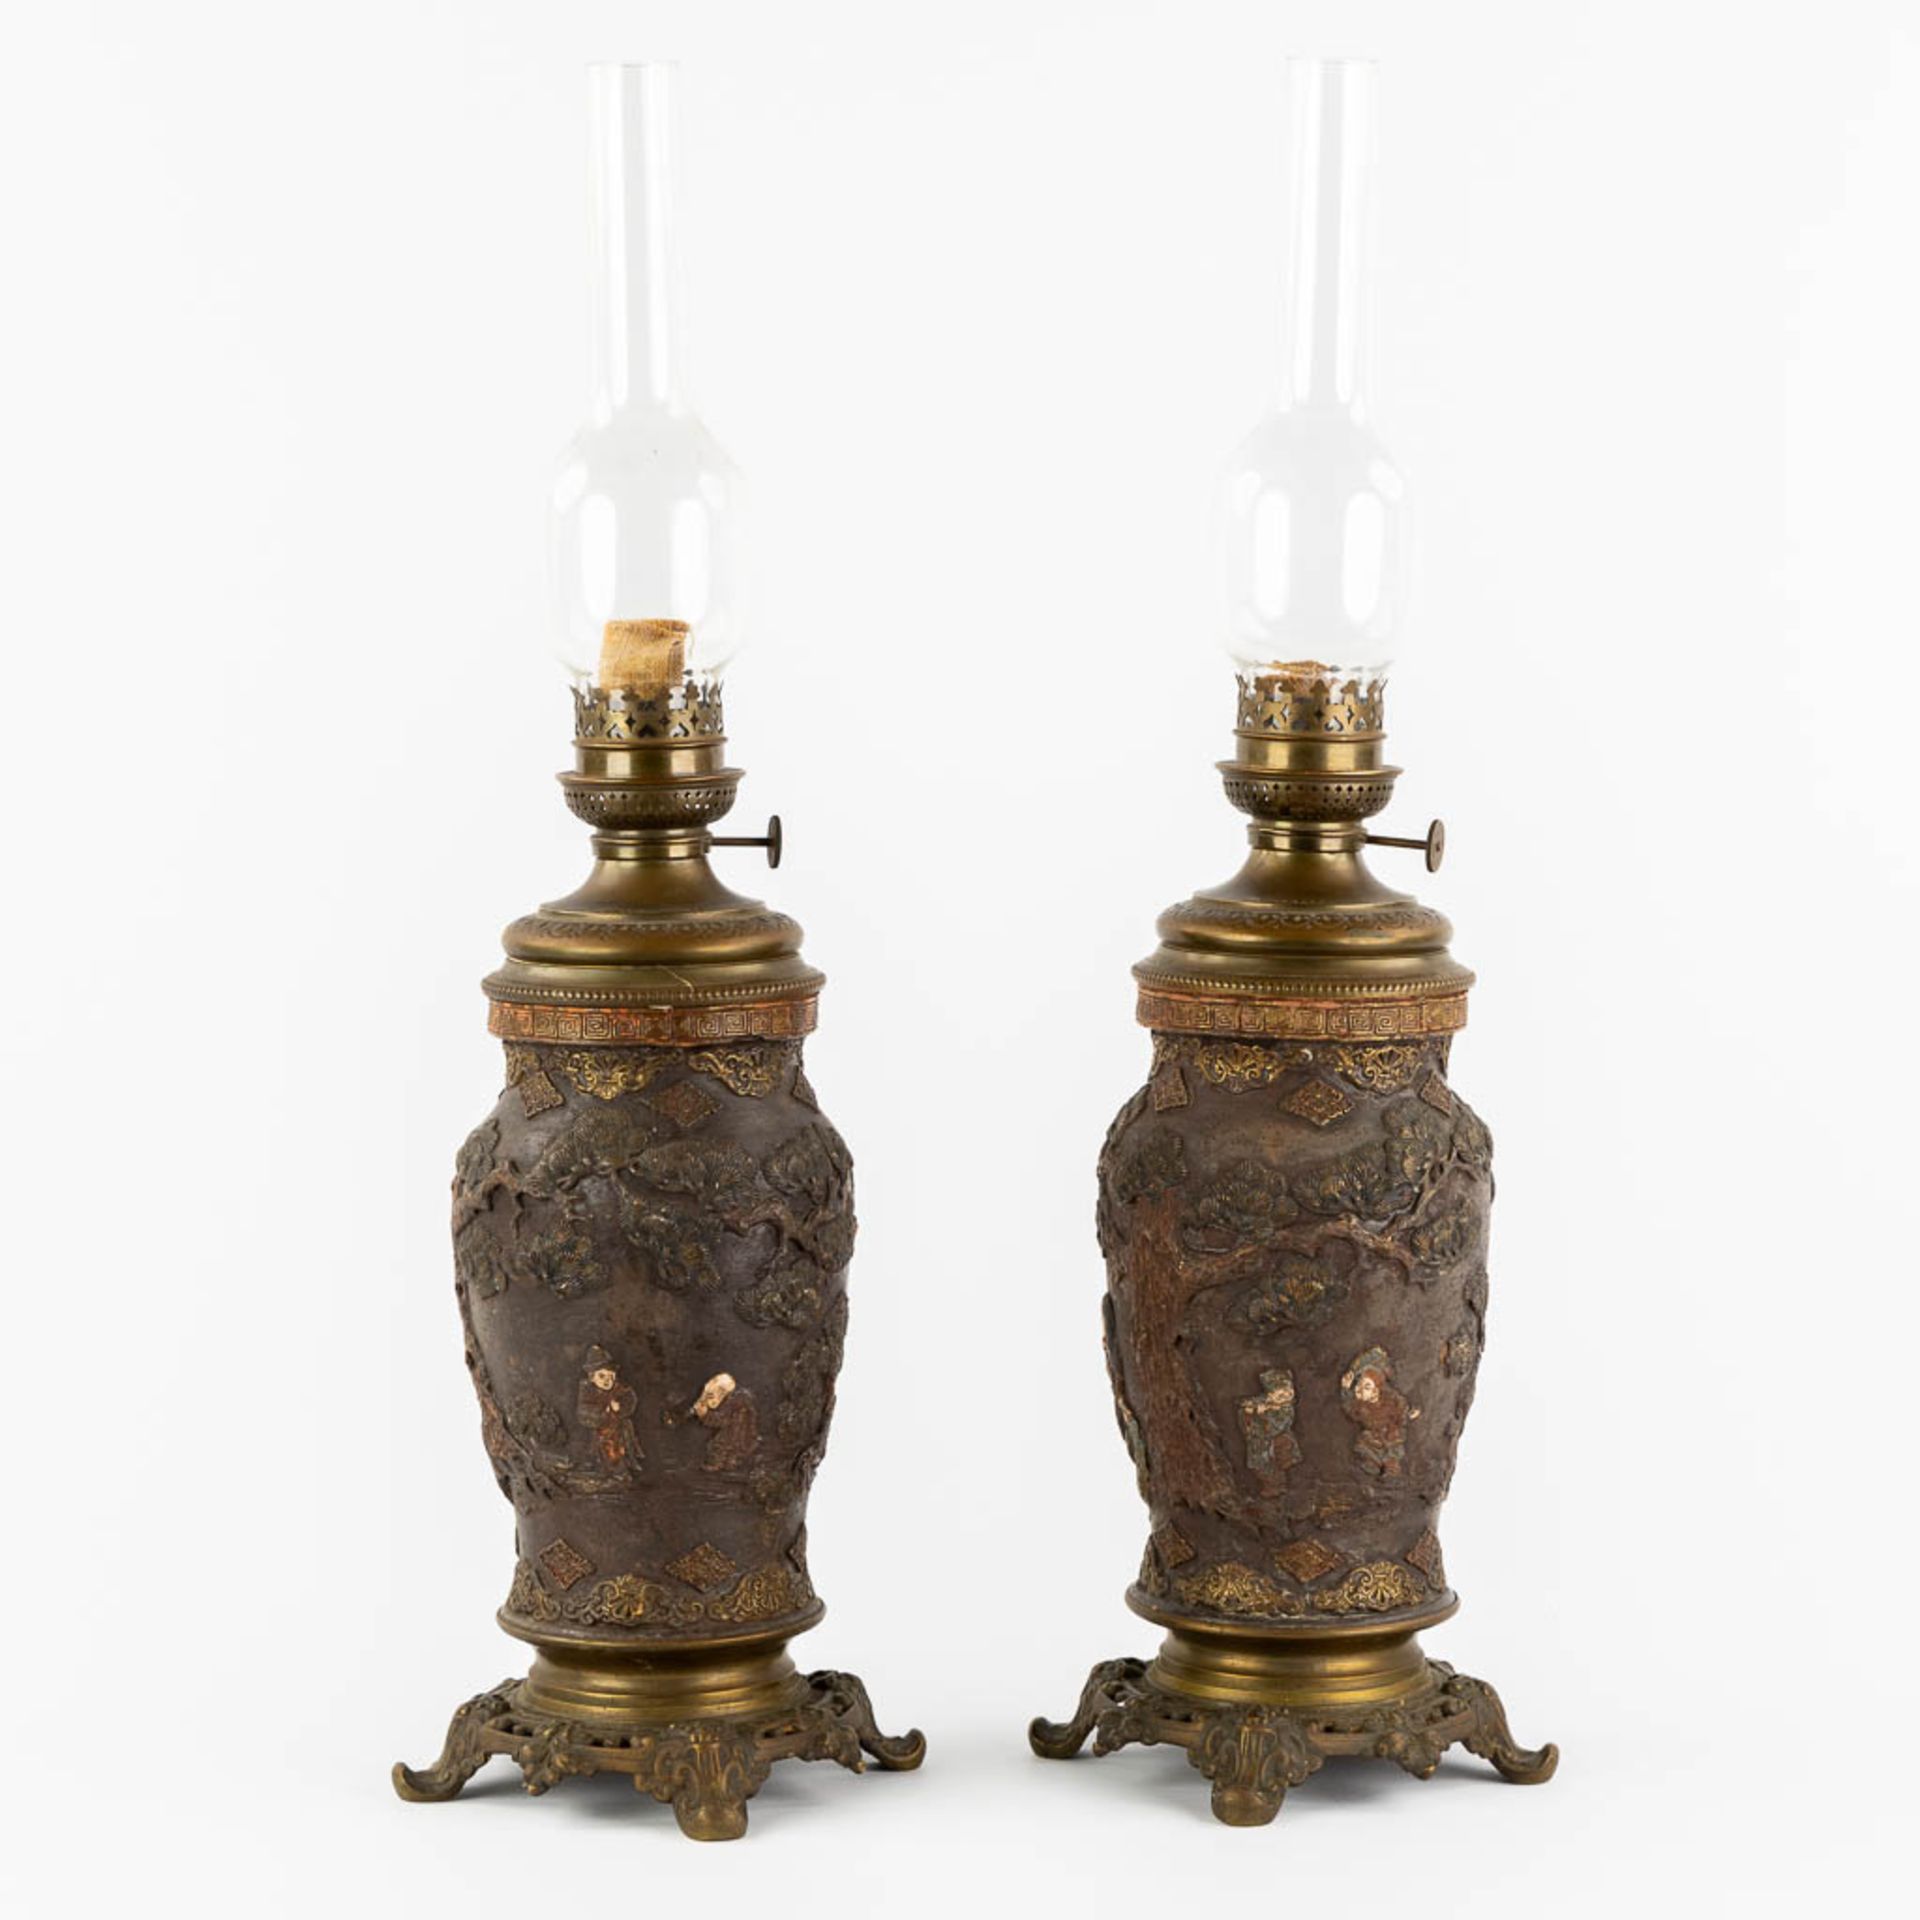 An Oriental pair of oil lamps, terracotta mounted with bronze. Circa 1900. (H:66 x D:18 cm) - Image 6 of 17